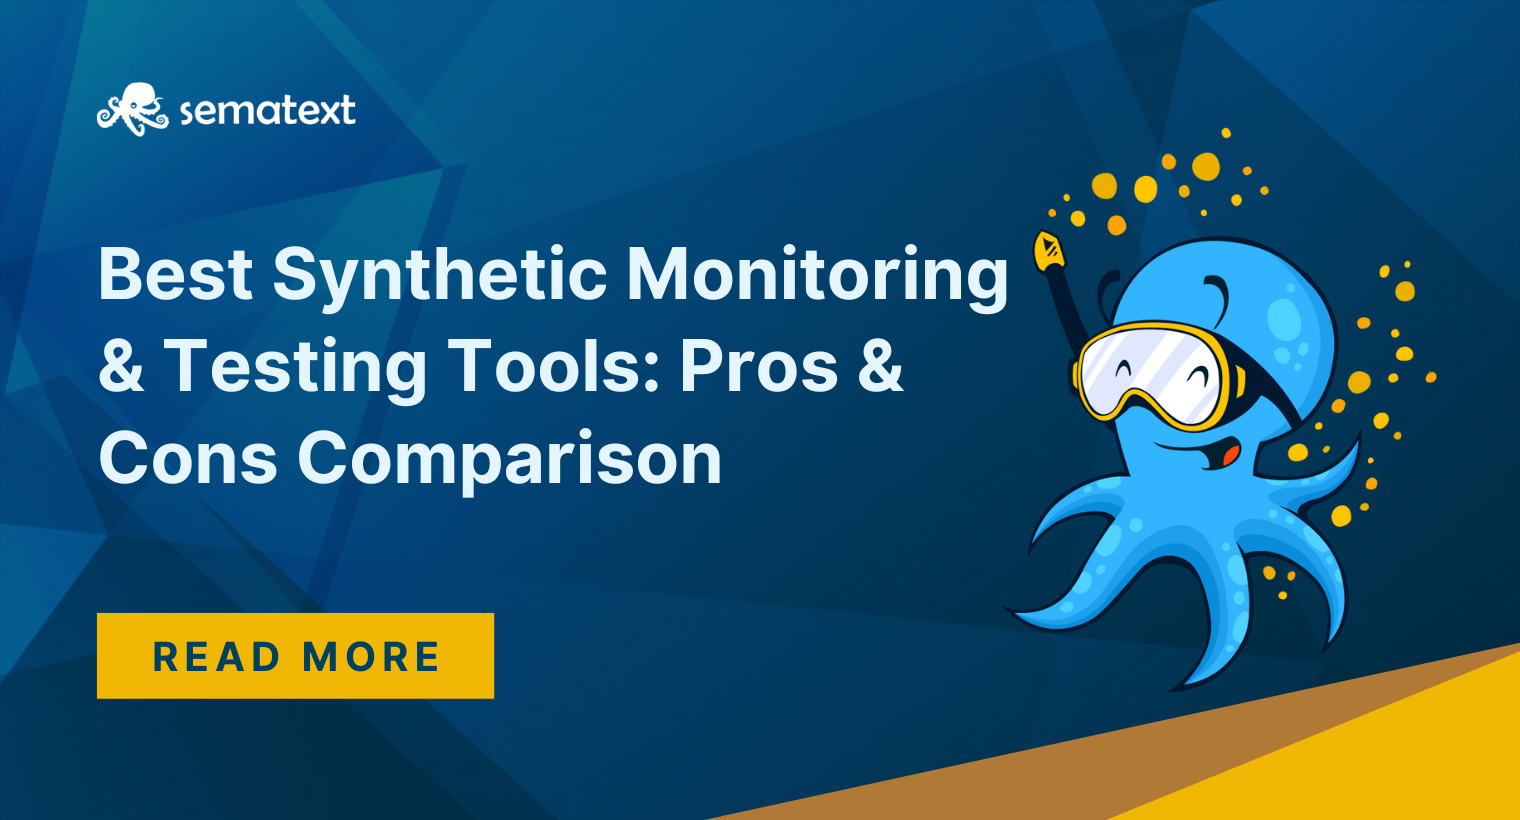 10+ Best Synthetic Monitoring & Testing Tools of 2023: Pros & Cons Comparison